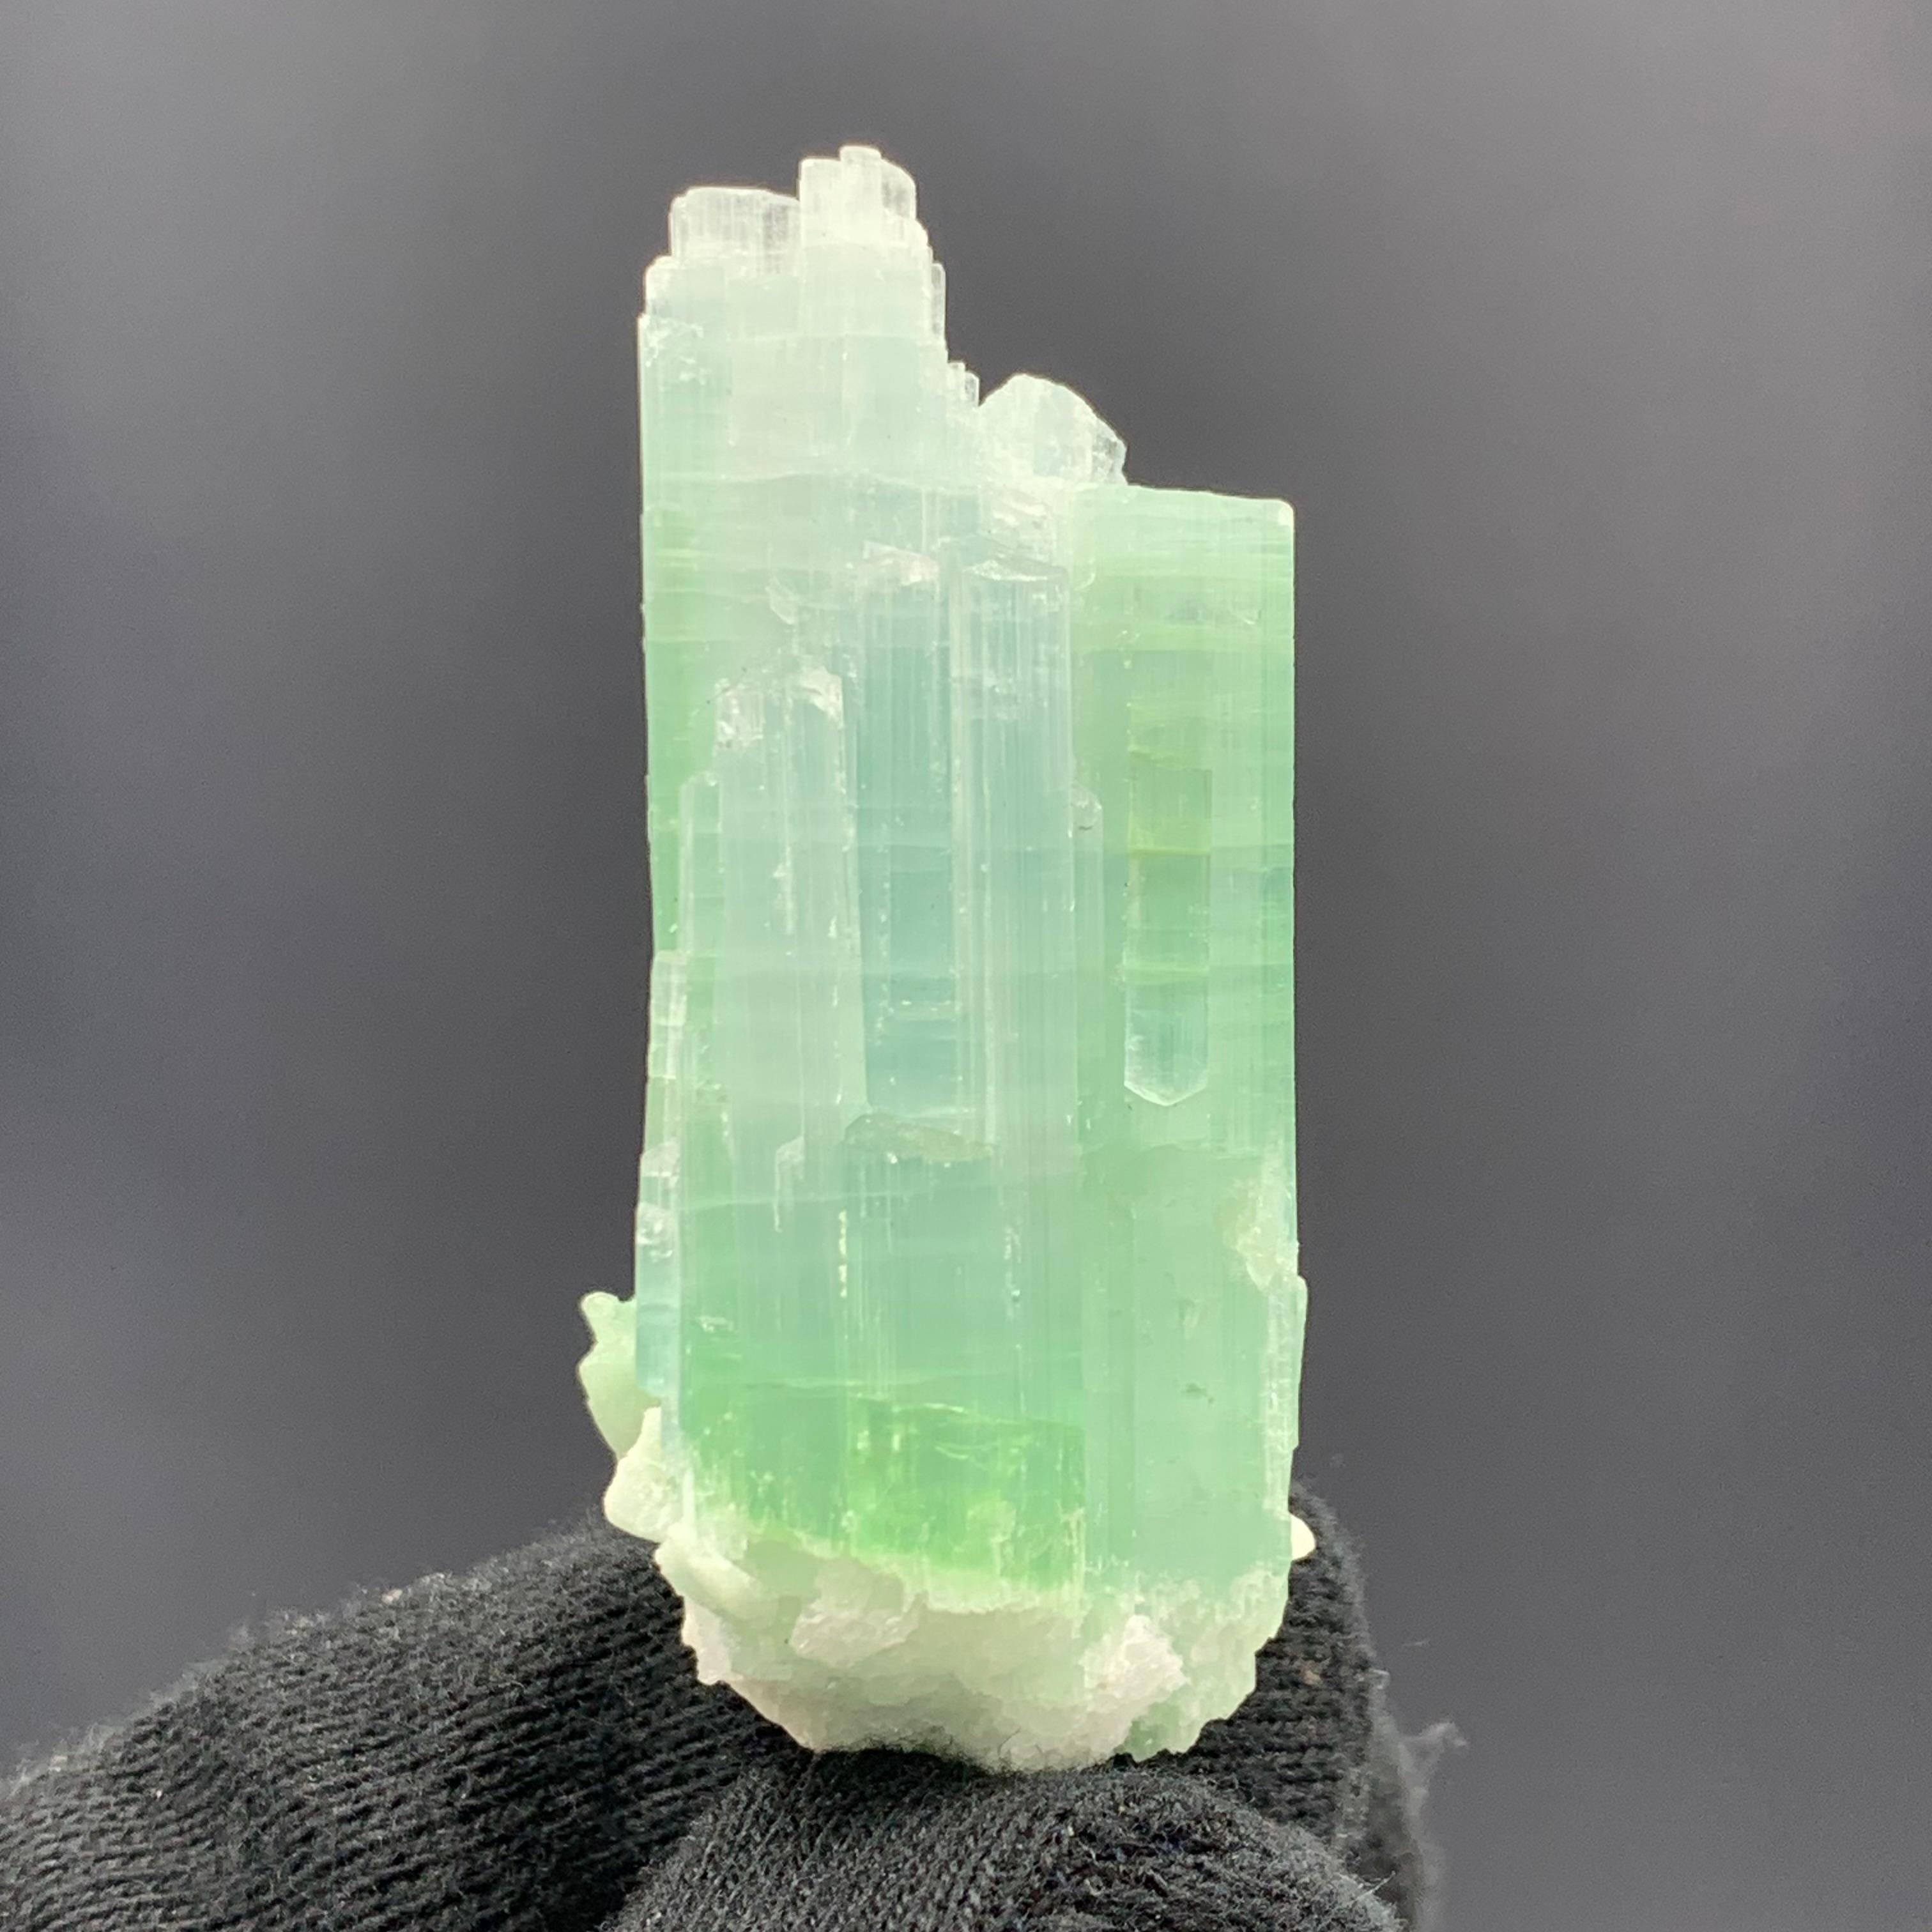 25.75 Gram Pretty Light Green Tourmaline Crystal Bunch from Kunar, Afghanistan 

Weight: 25.75 Gram 
Dimension: 5.5 x 2.4 x 1.5 Cm
Origin: Kunar, Afghanistan 

Tourmaline is a crystalline silicate mineral group in which boron is compounded with